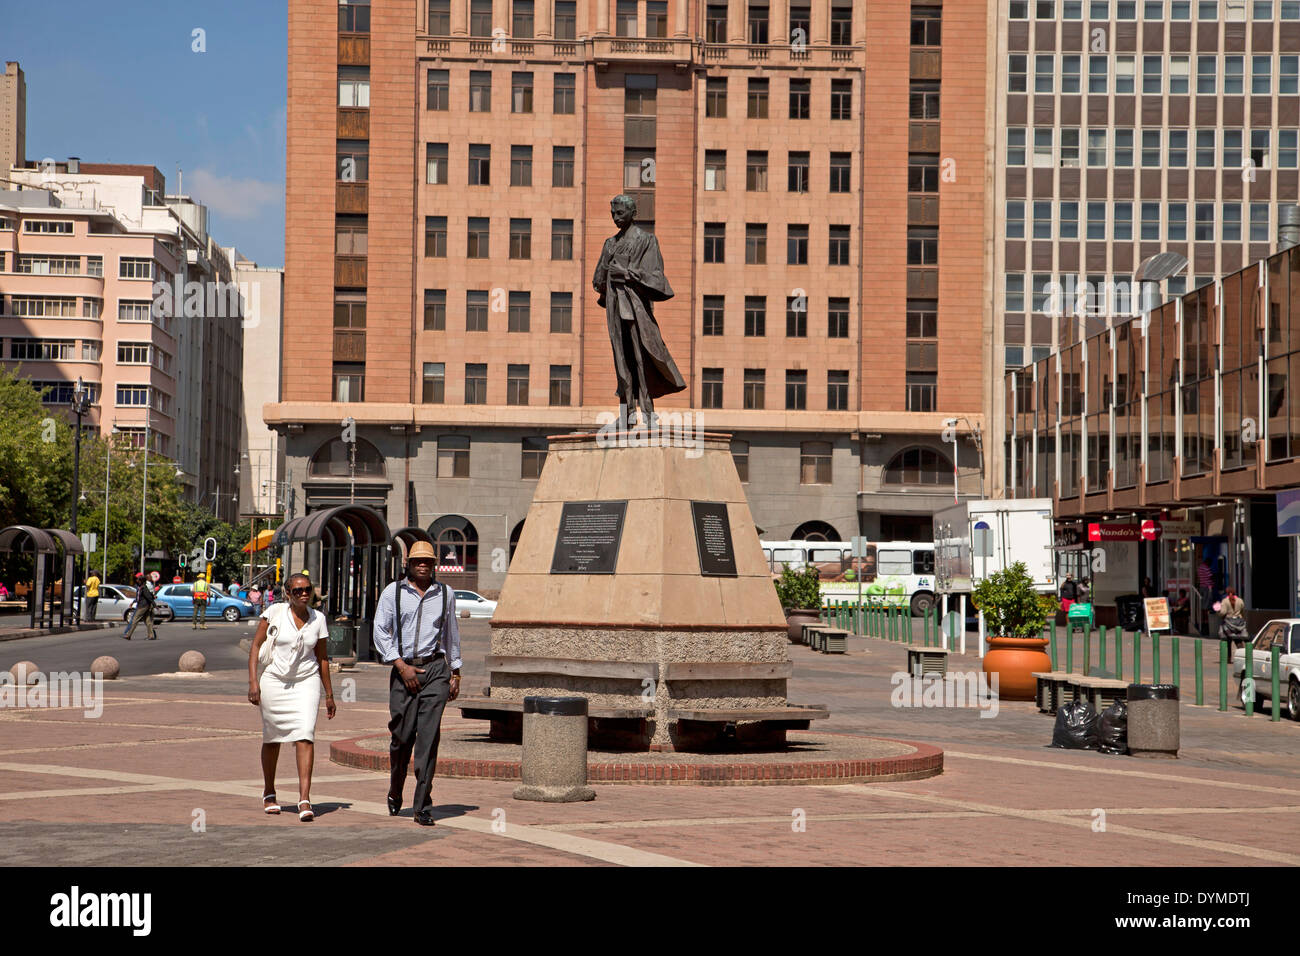 Ghandi statue on central Ghandi Square in Johannesburg, Gauteng, South Africa, Africa Stock Photo